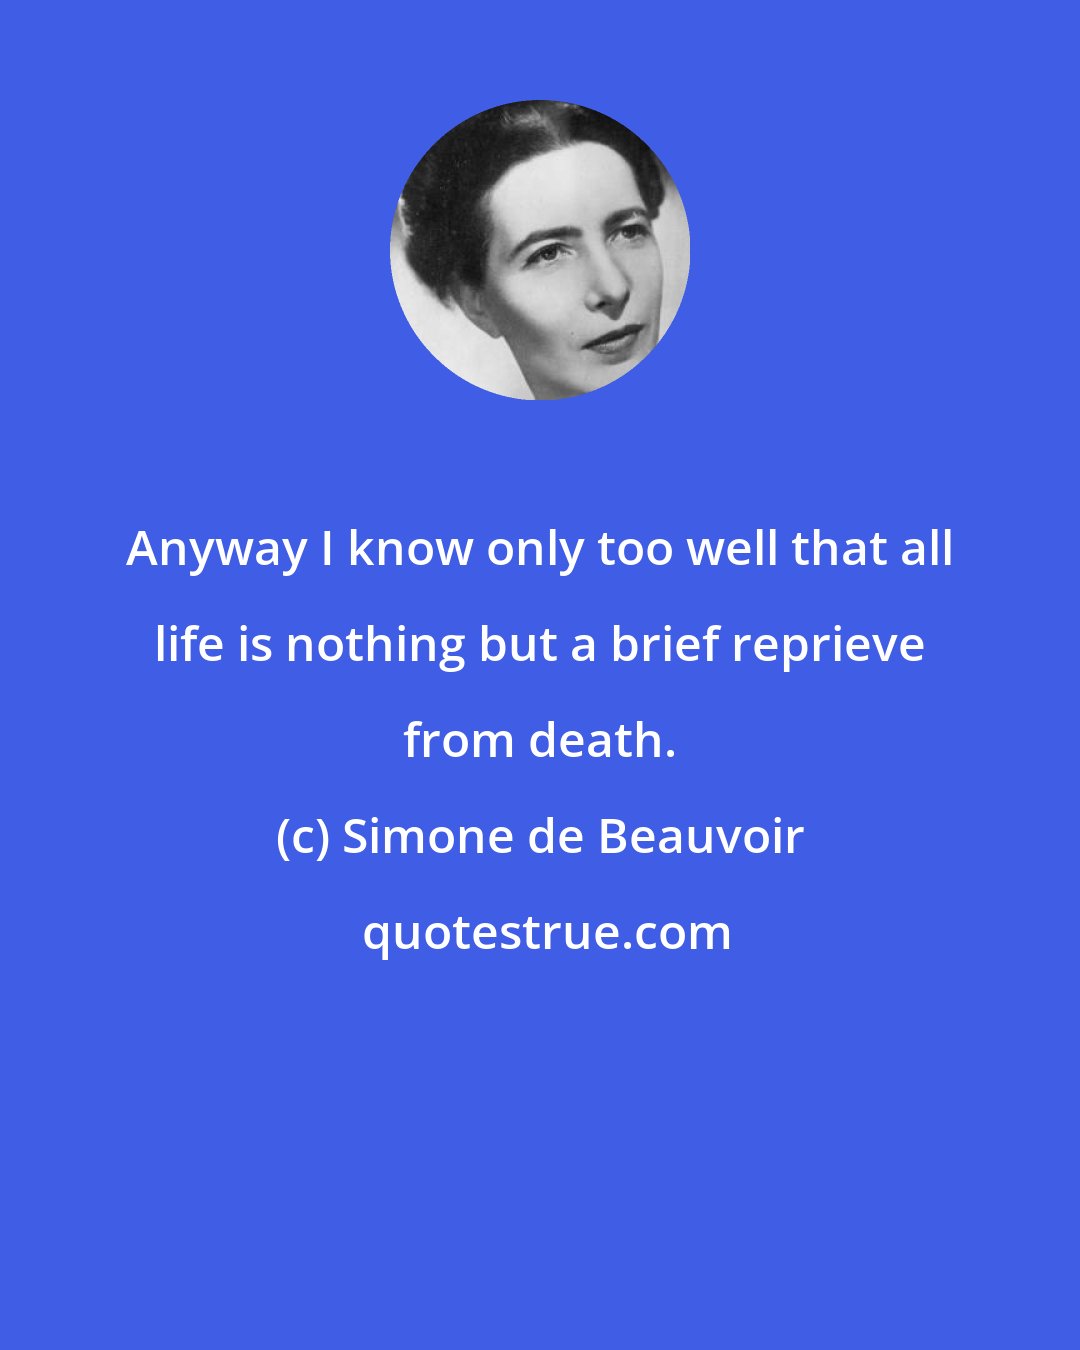 Simone de Beauvoir: Anyway I know only too well that all life is nothing but a brief reprieve from death.